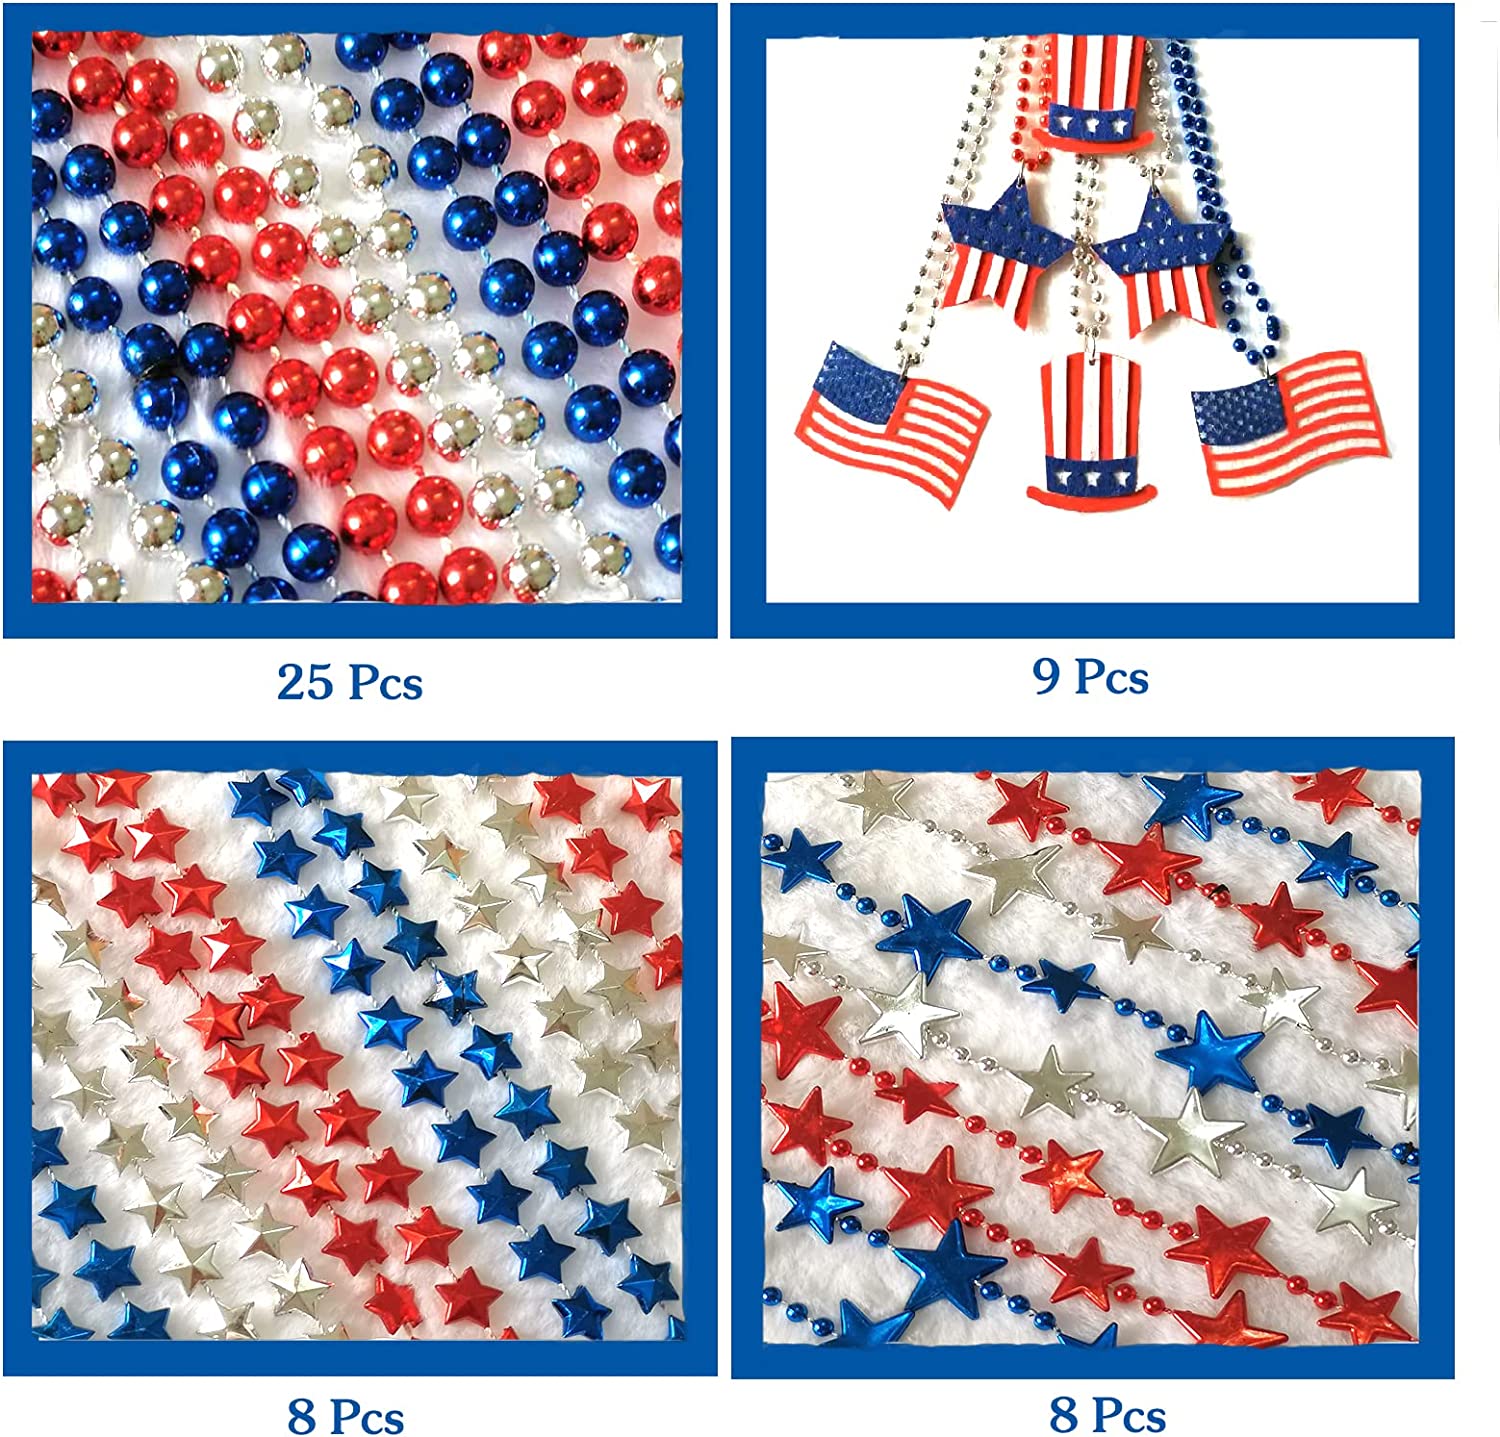 50 Pcs 4th of July Beads Necklaces Bulk, Metallic Red Bule Silver Patriotic Star Bead Necklaces for 4th of July